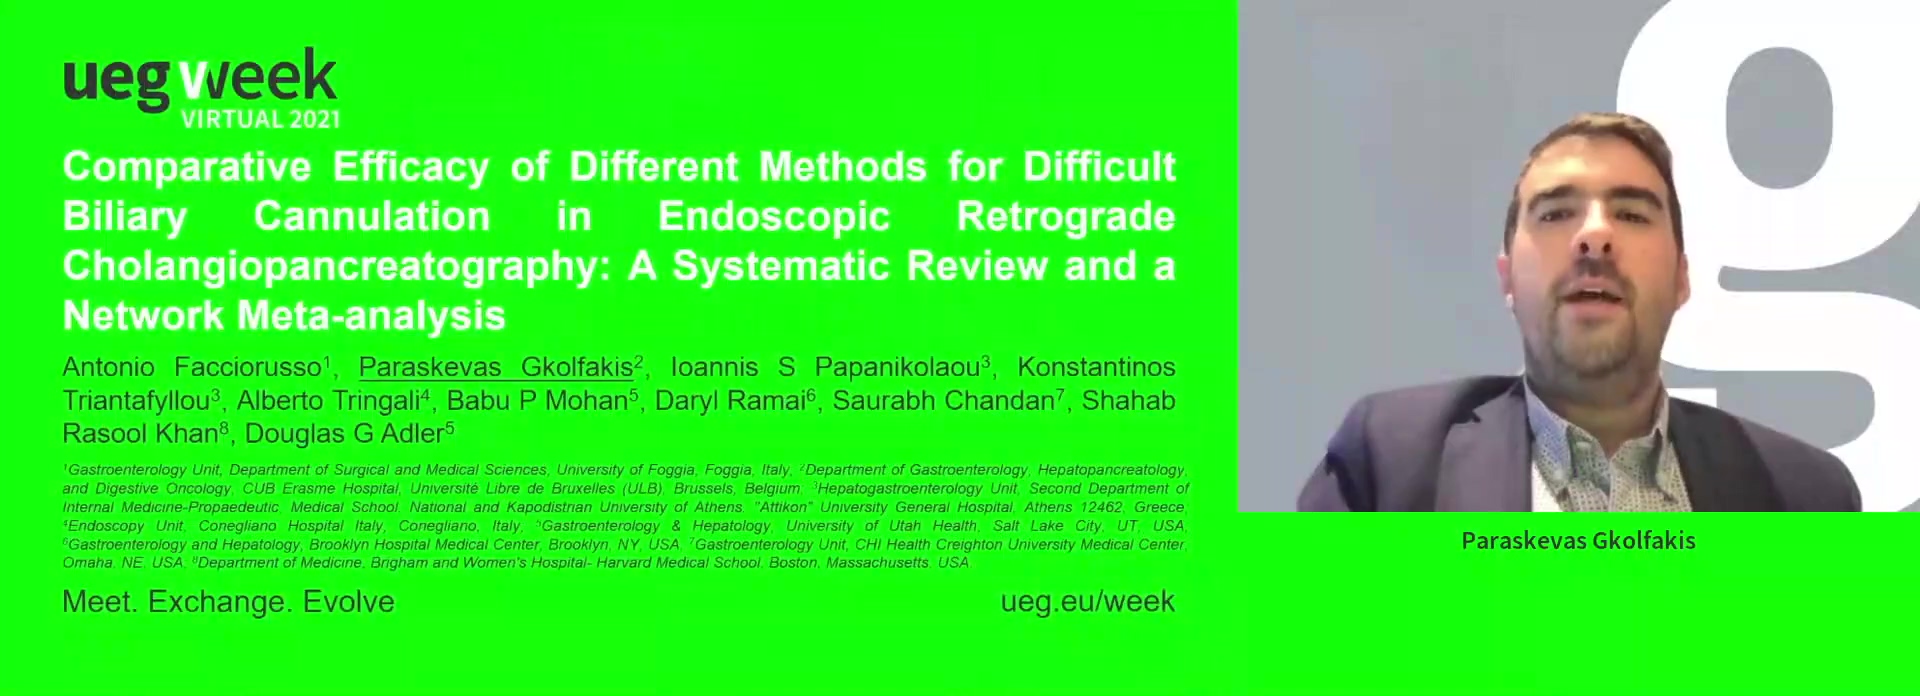 COMPARATIVE EFFICACY OF DIFFERENT METHODS FOR DIFFICULT BILIARY CANNULATION IN ENDOSCOPIC RETROGRADE CHOLANGIOPANCREATOGRAPHY: A SYSTEMATIC REVIEW AND A NETWORK META-ANALYSIS